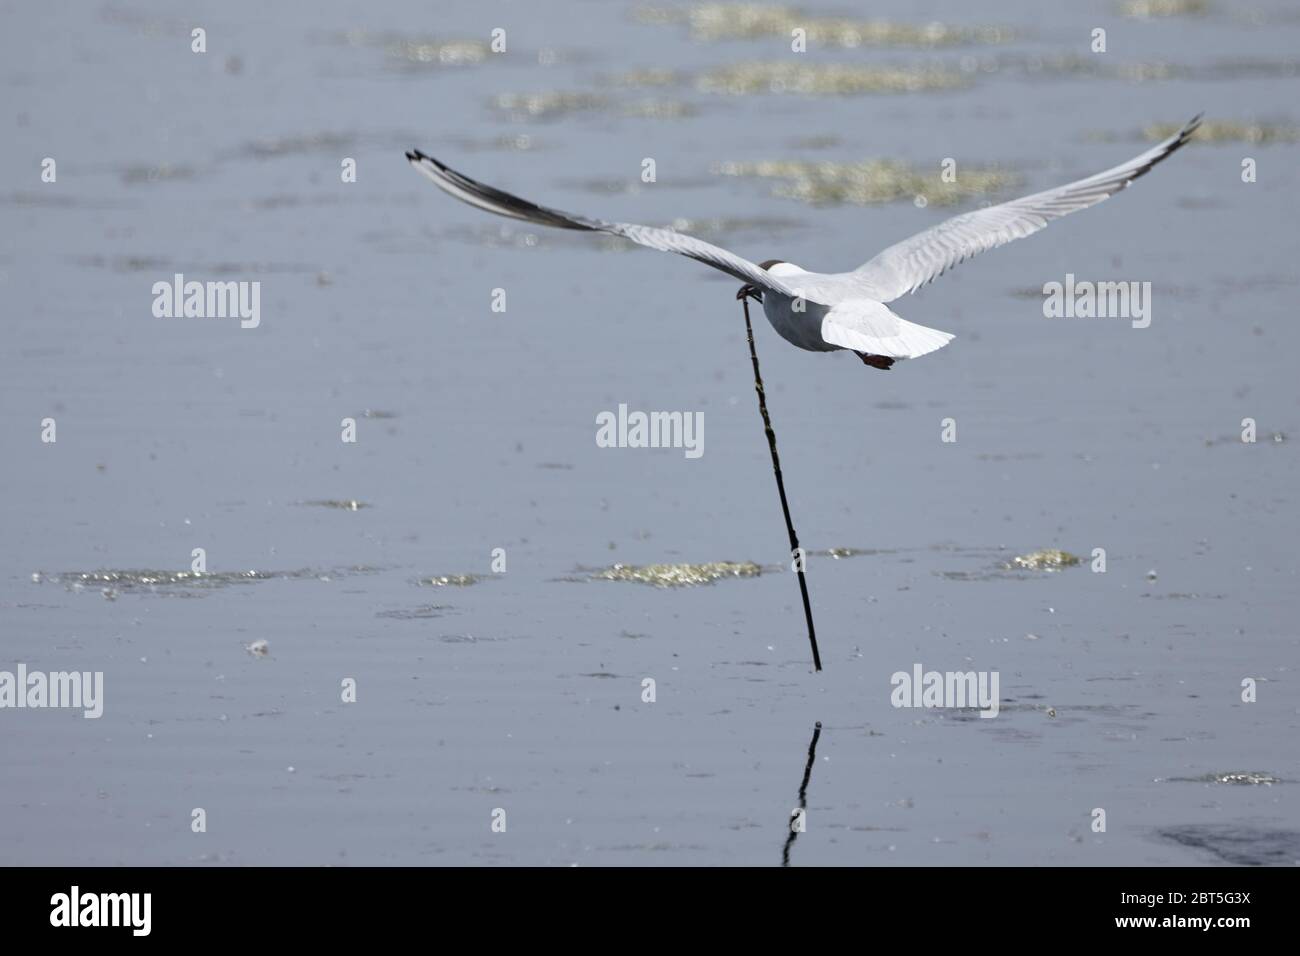 Black-headed gull (Chroicocephalus ridibundus) flies above water and carries a long stick for nest building in Waghäusel, Germany Stock Photo